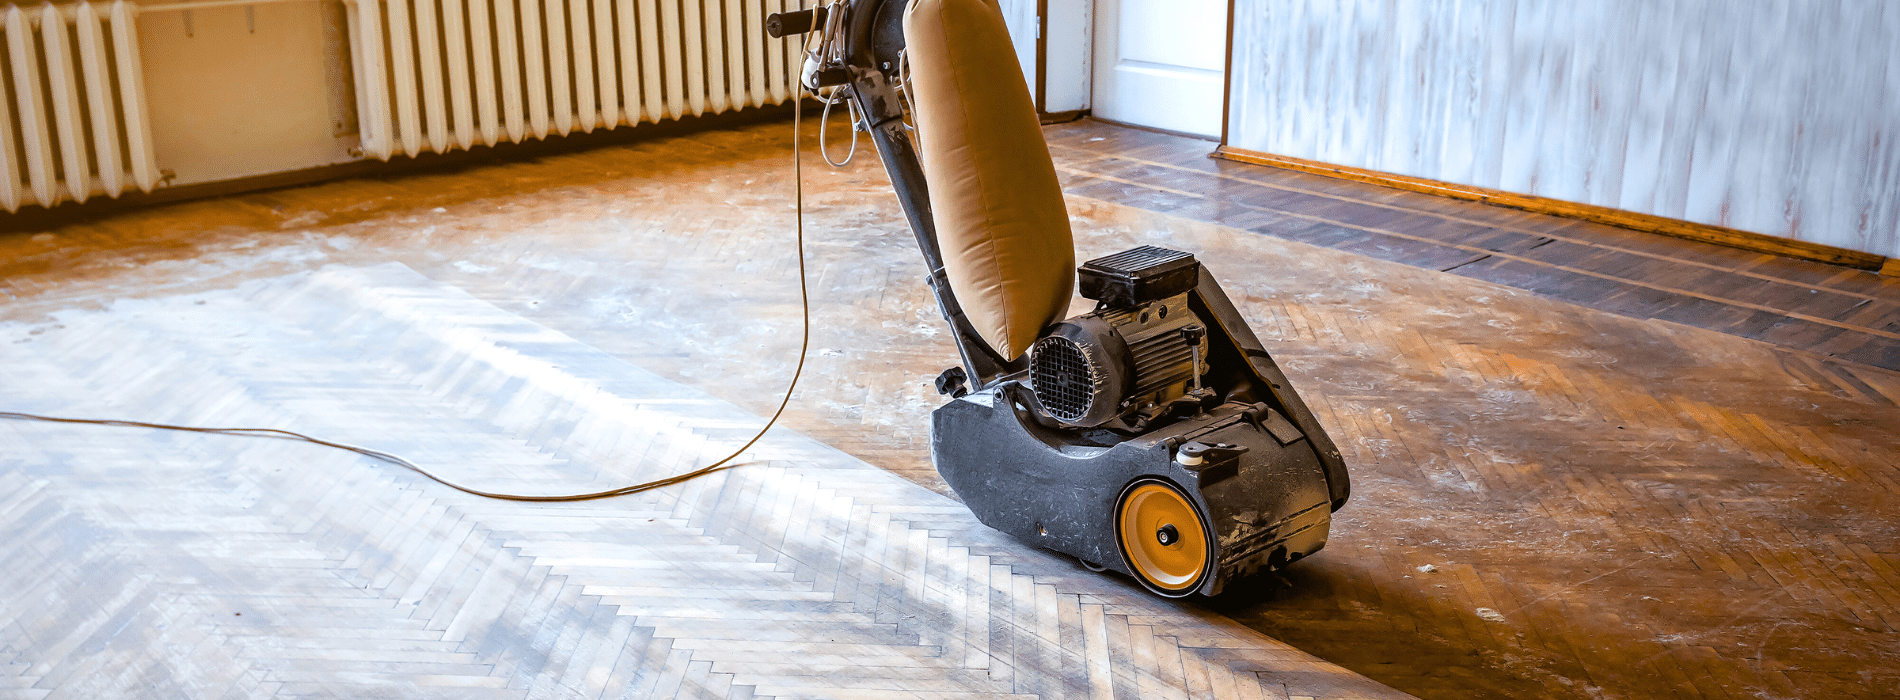 In Carshalton, SM5, Mr Sander® using Bona Scorpion, a 200mm drum sander (1.5 kW, 240V, 50Hz) connected to a HEPA-filtered dust extraction system, to get clean and efficient results for your hardwood floor sanding.